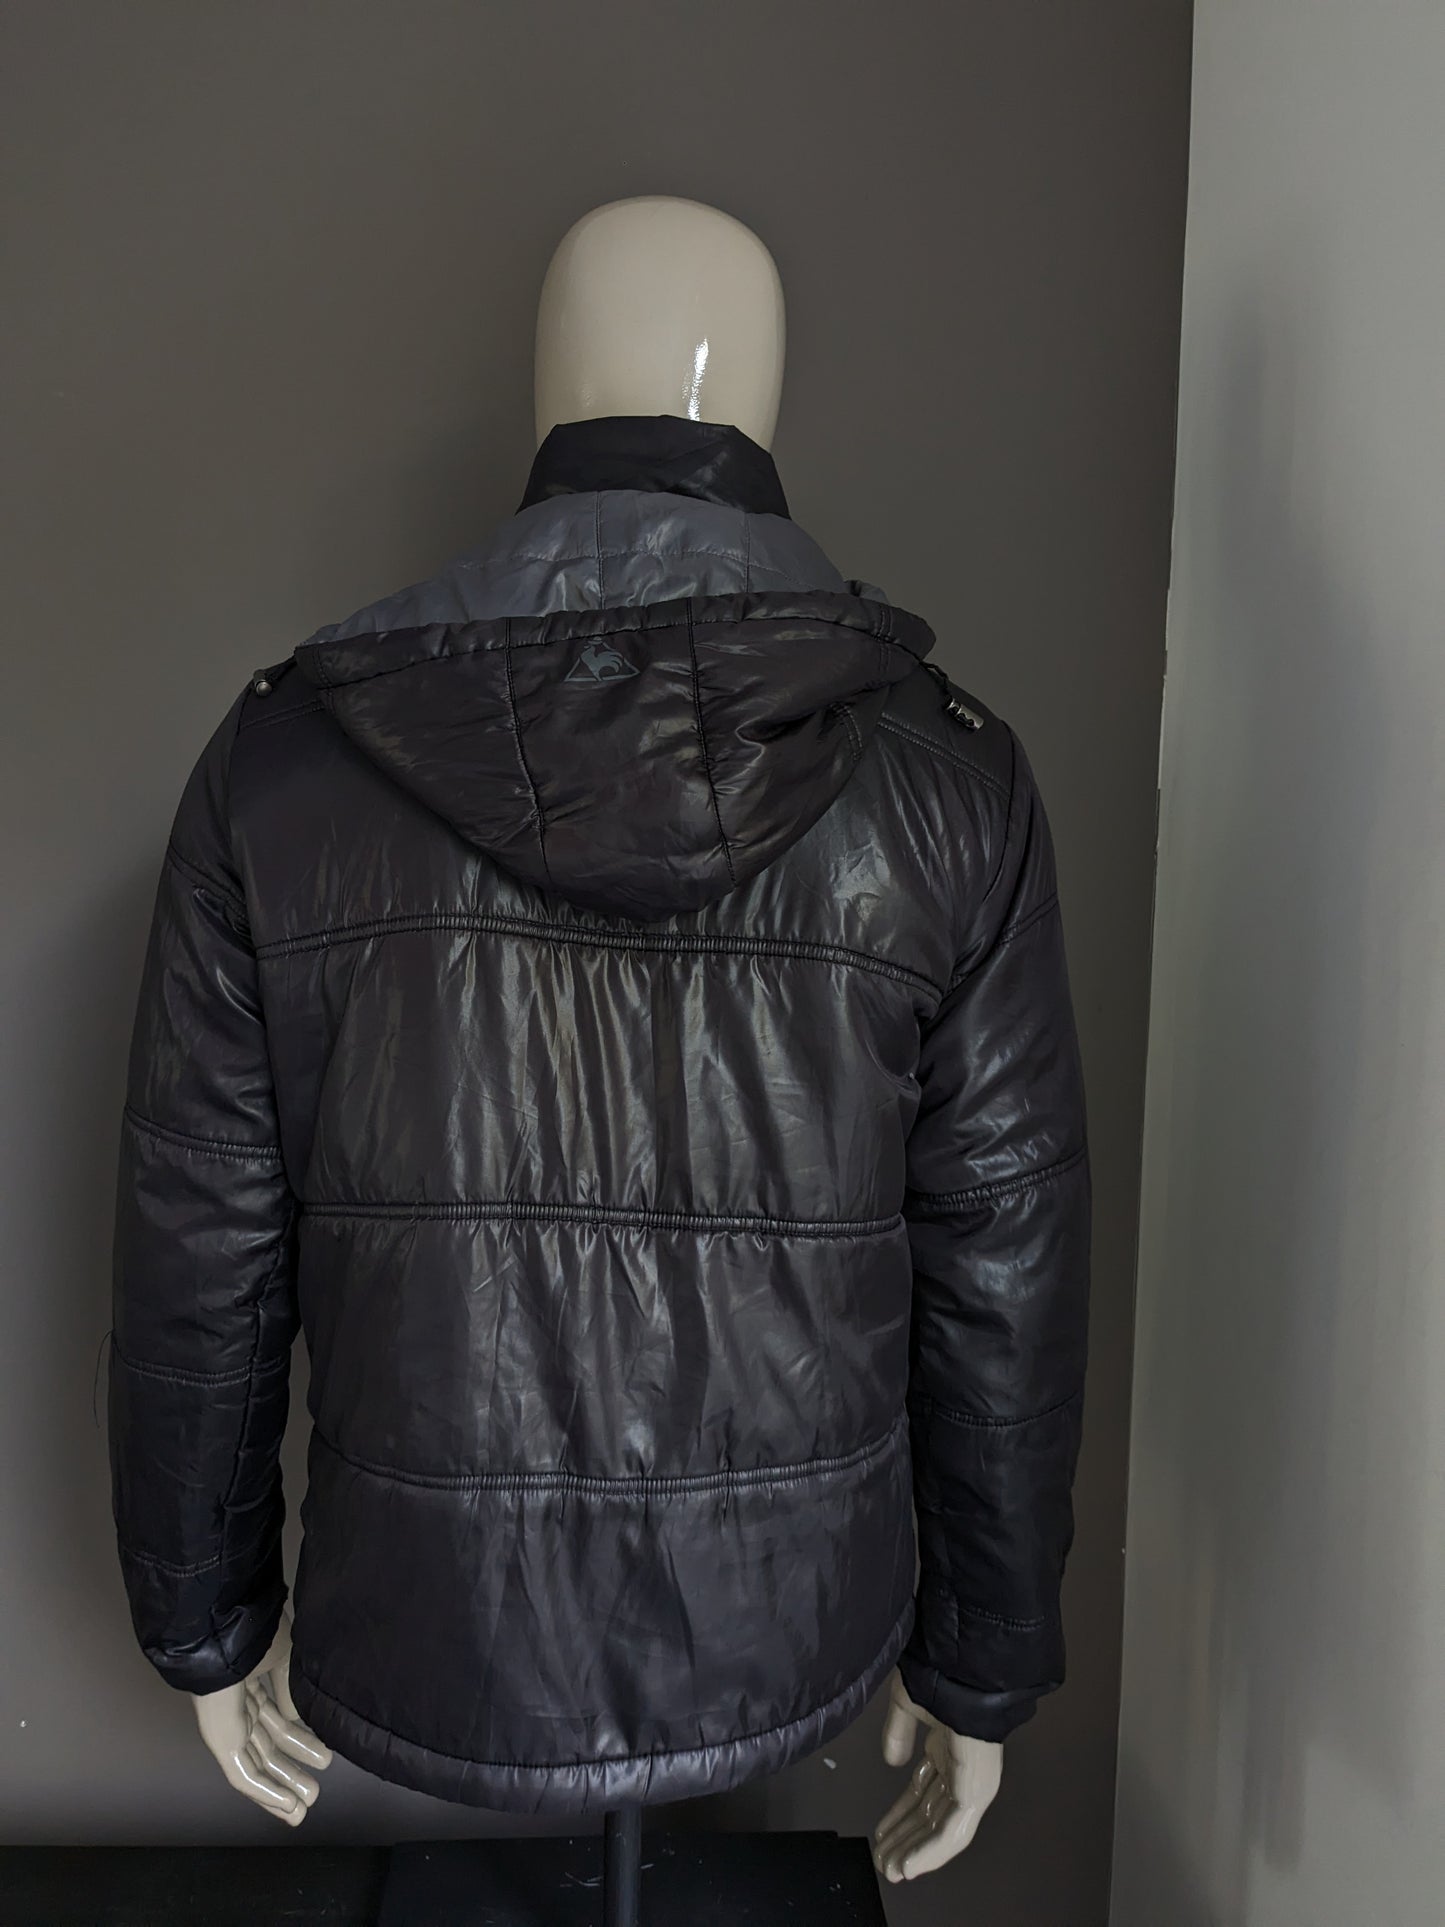 Le Coq Sportif Quilted Winter Jacket With Department Hood. Black gray colored. Size M.